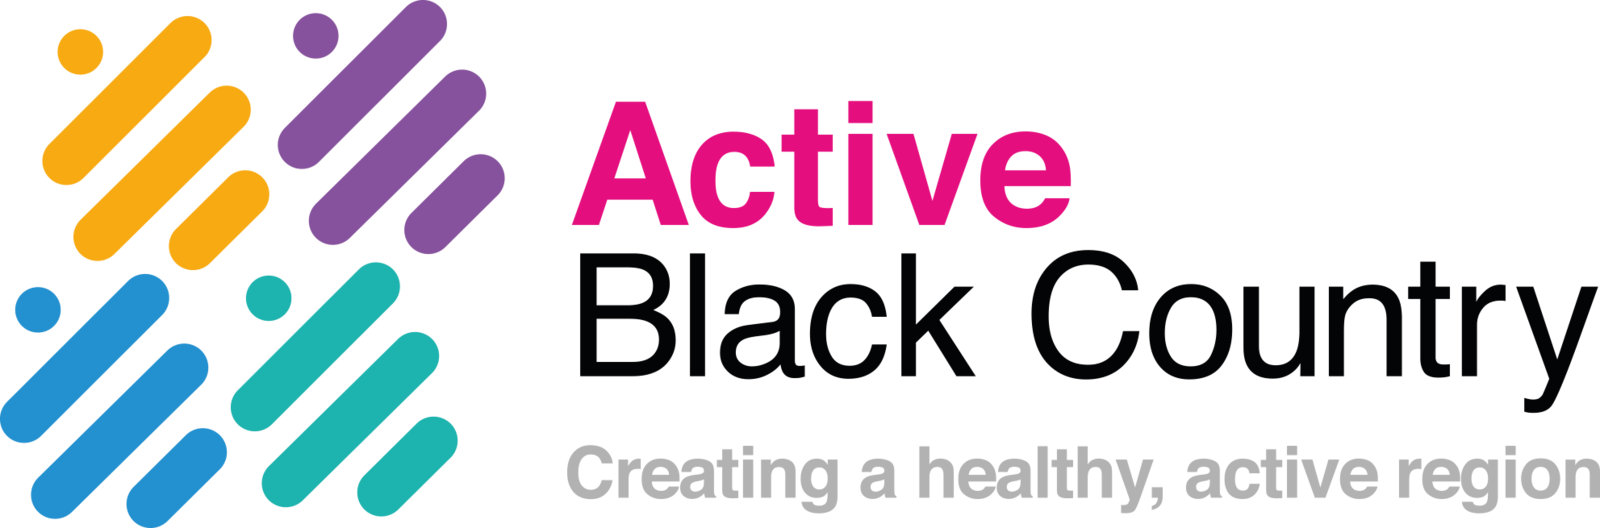 Active Black Country Sector Skills Plan Brief